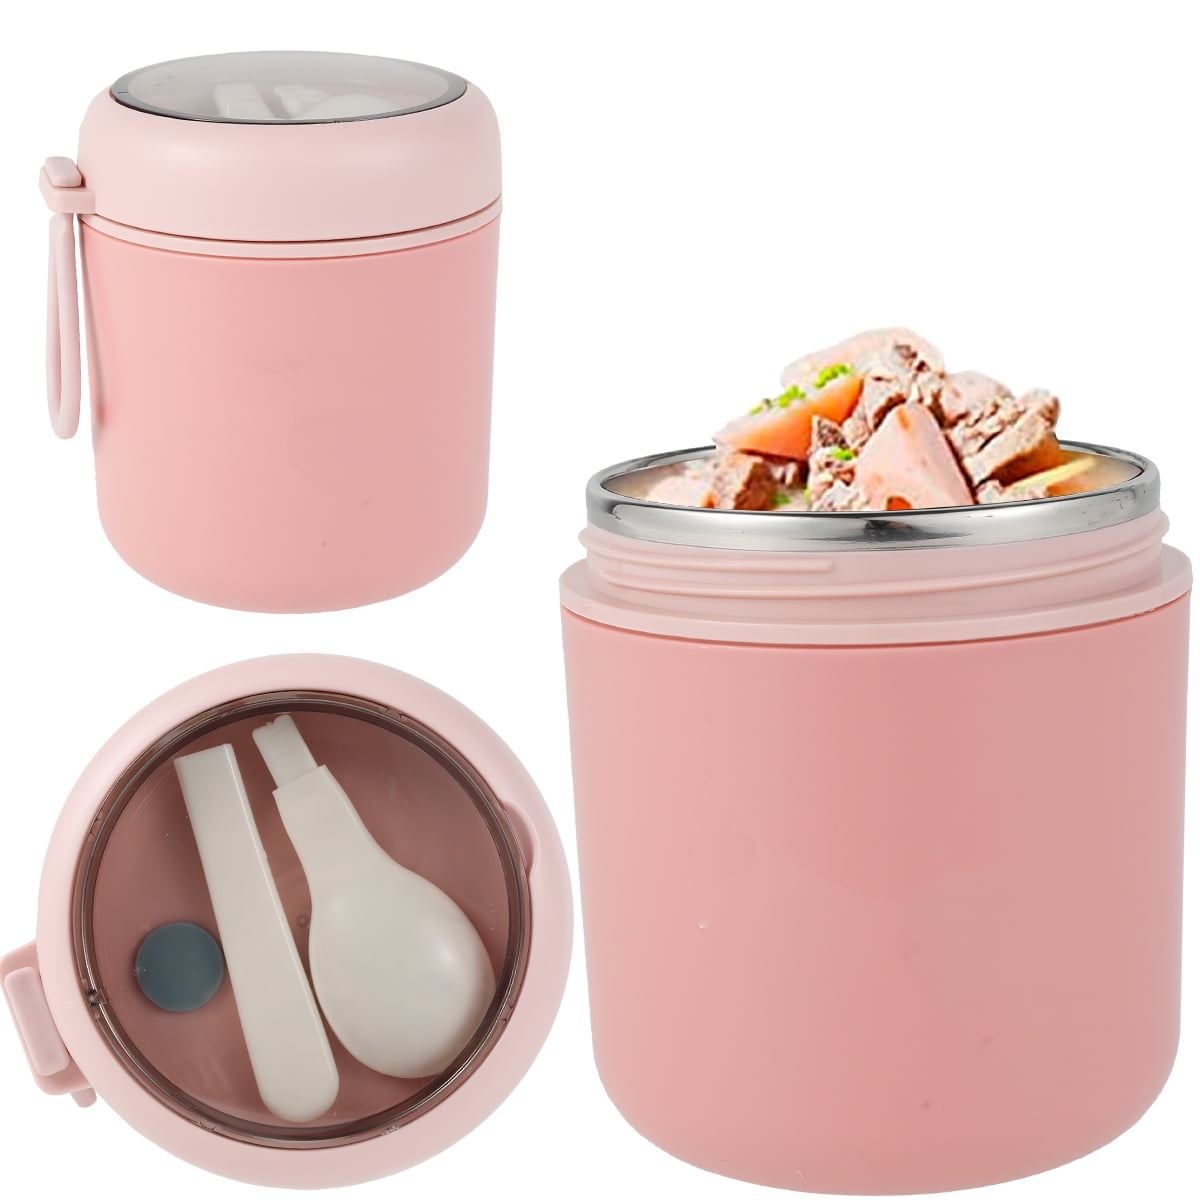 Qenwkxz 18 oz Insulated Food Jar Vacuum Bento Box Lunch Containers Wide Mouth Food Soup Thermos with Spoon Stainless Steel Leak Proof Keeps Food Hot Cold for School Travel Picnic for Kids Adults